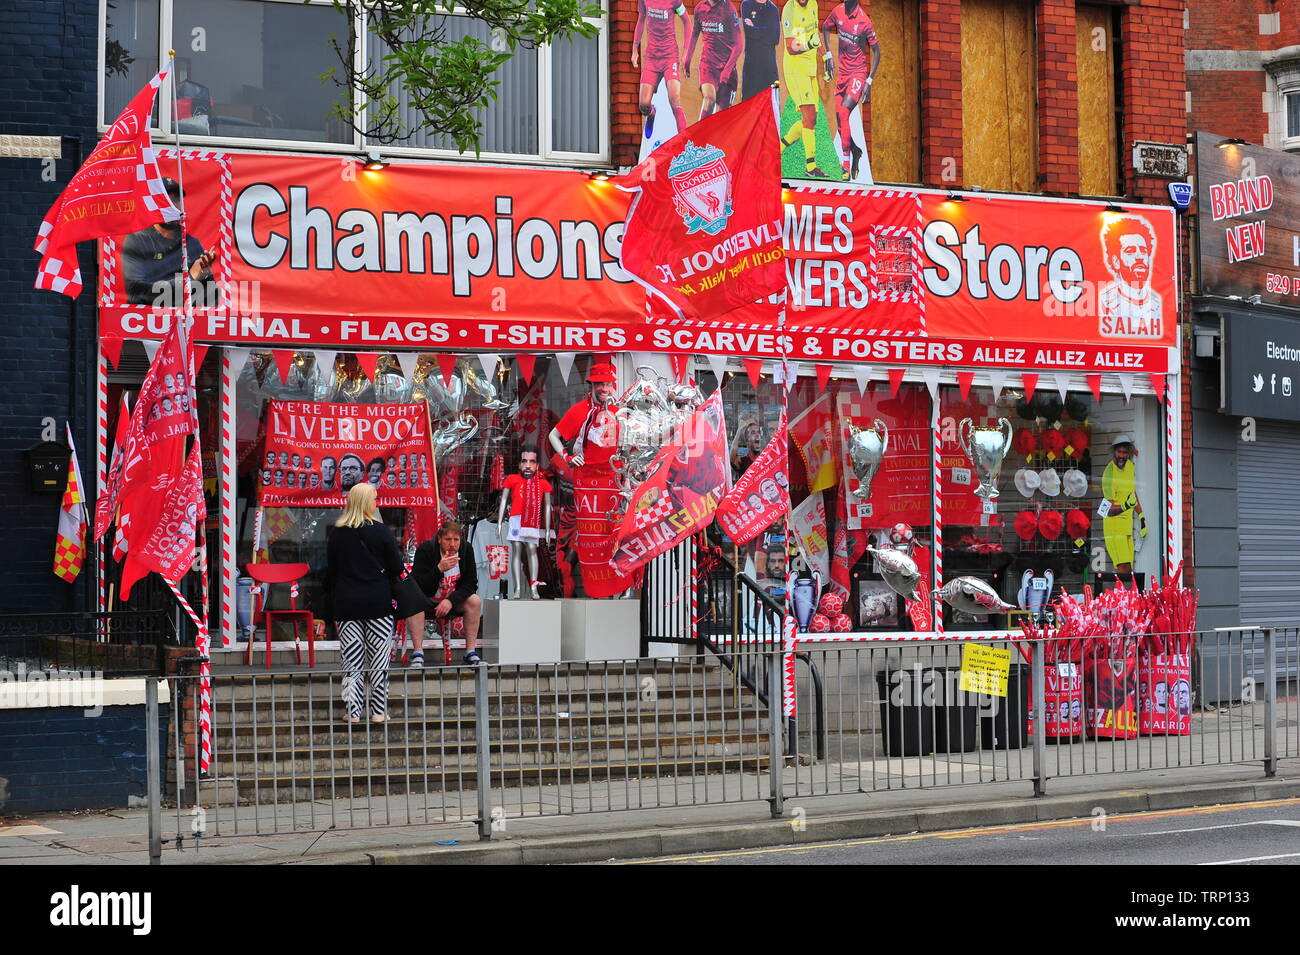 Pop up Champions League Stores in Liverpool prior to the 2019 Champions League Final between Liverpool & Tottenham Hotspur. Stock Photo